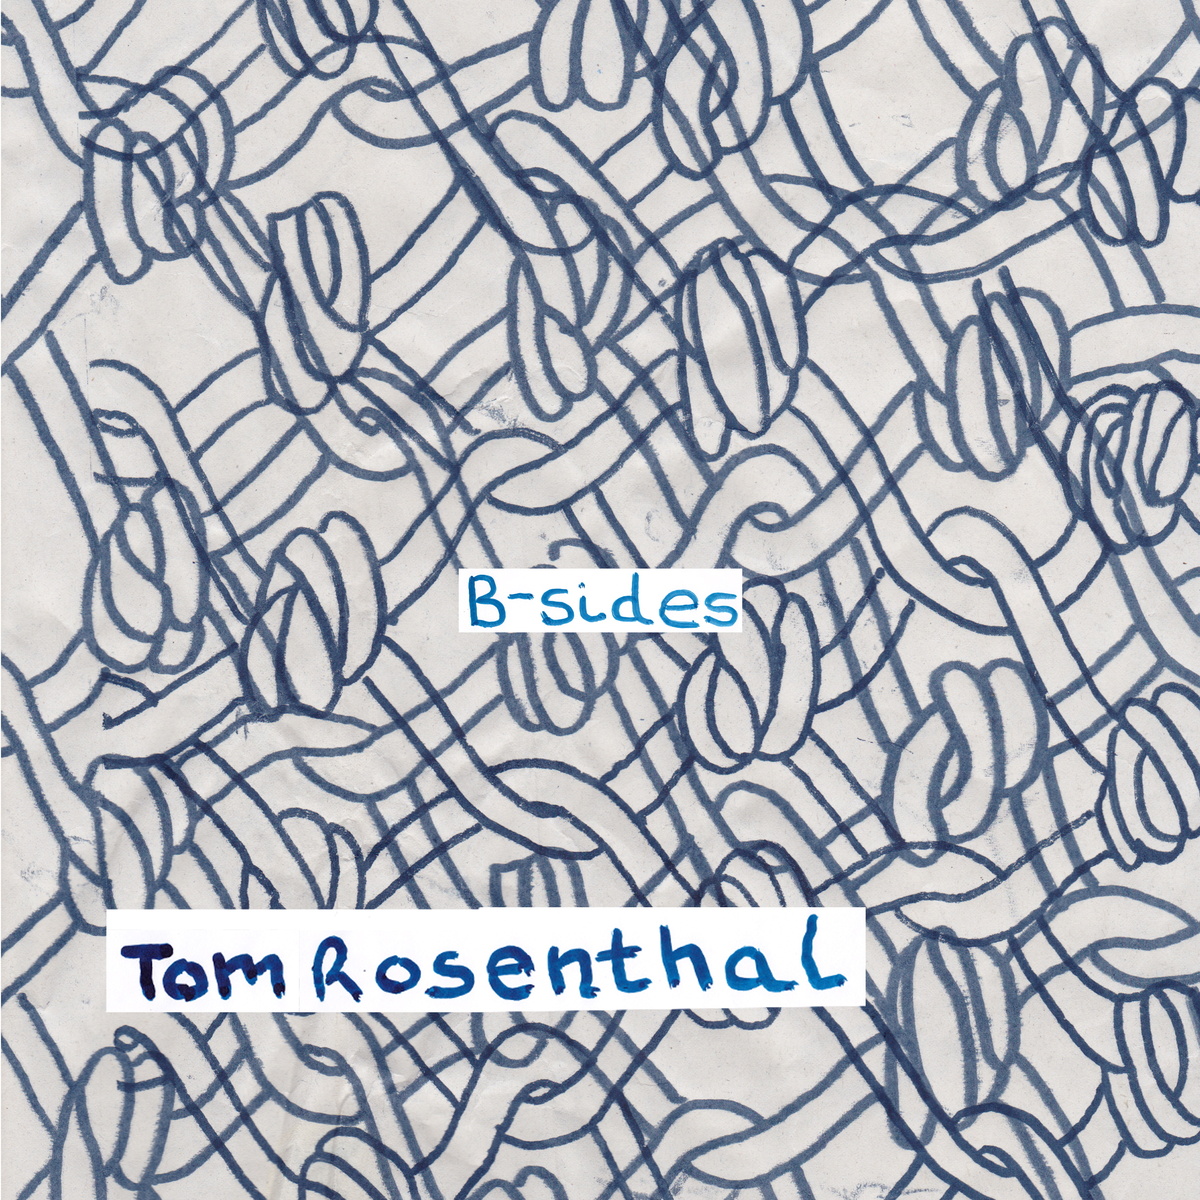 News Added Oct 09, 2013 "B-sides" by Tom Rosenthal is "a selection of B-sides that didn't quite make the A team for one reason or another". Submitted By Abu-Dun Track list: Added Oct 09, 2013 1. Myriad of Troubles in the Old Blue Sea 2. YOLO 3. Have We Met Before? 4. One of Those […]